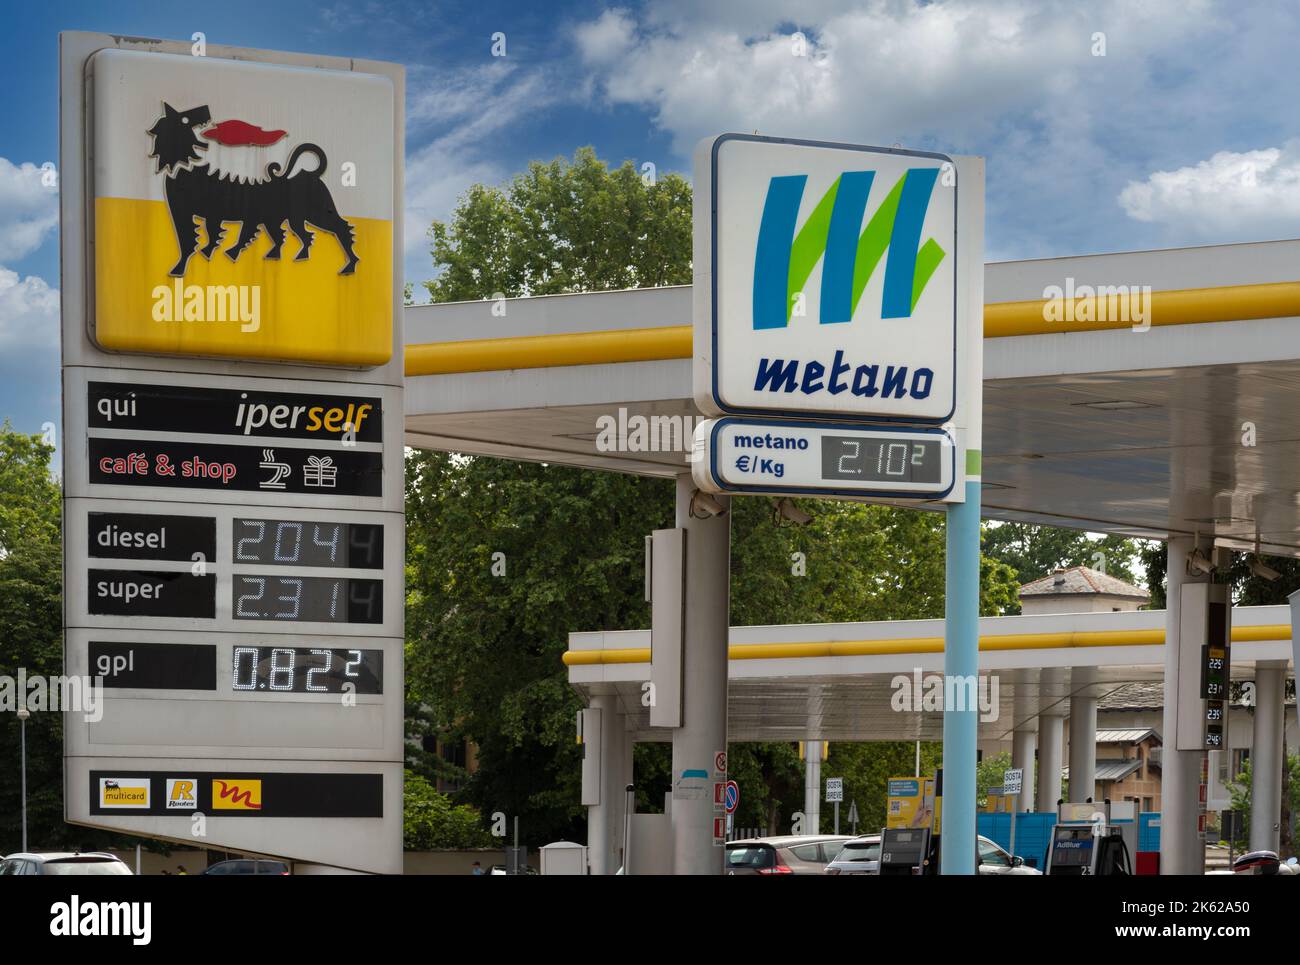 Cuneo, Italy, - June 27, 2022: Eni logo sign with fuel price display and Metano (methane) sign in gas station Eni, it is an Italian oil company worldw Stock Photo